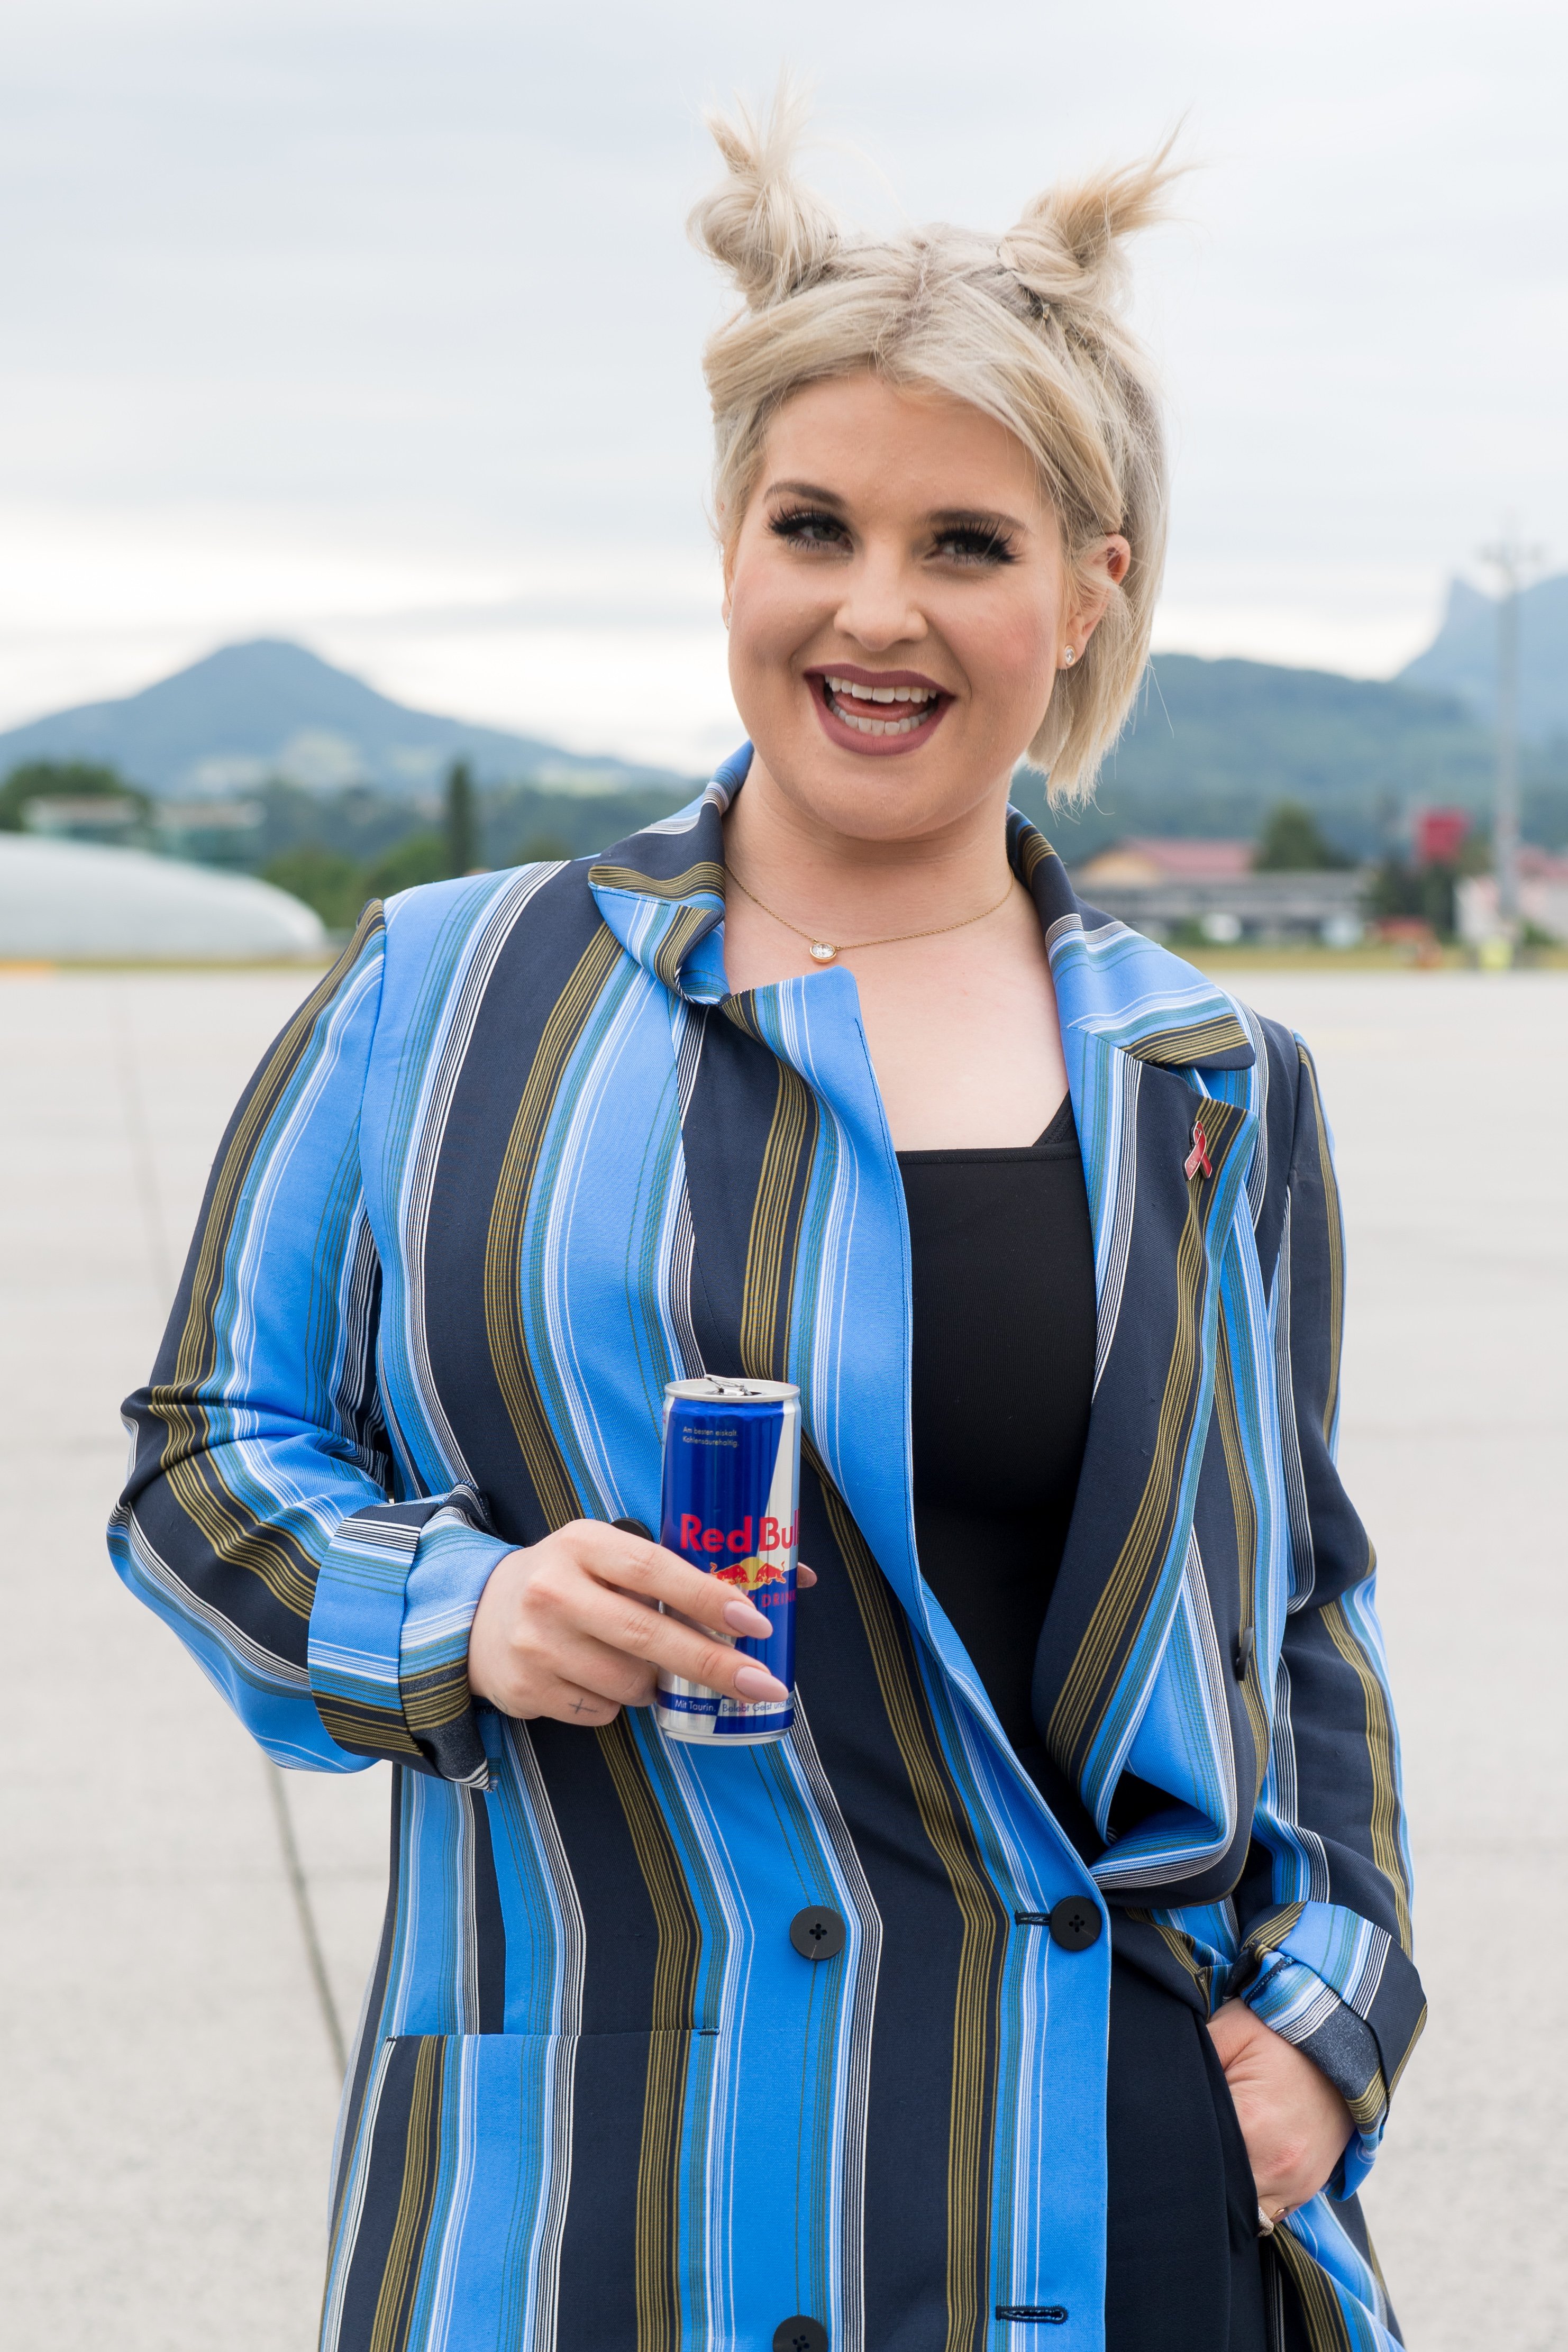 Kelly Osbourne during the arrival of the Life Ball plane on June 1, 2018 in Salzburg, Austria ┃Source: Getty Images